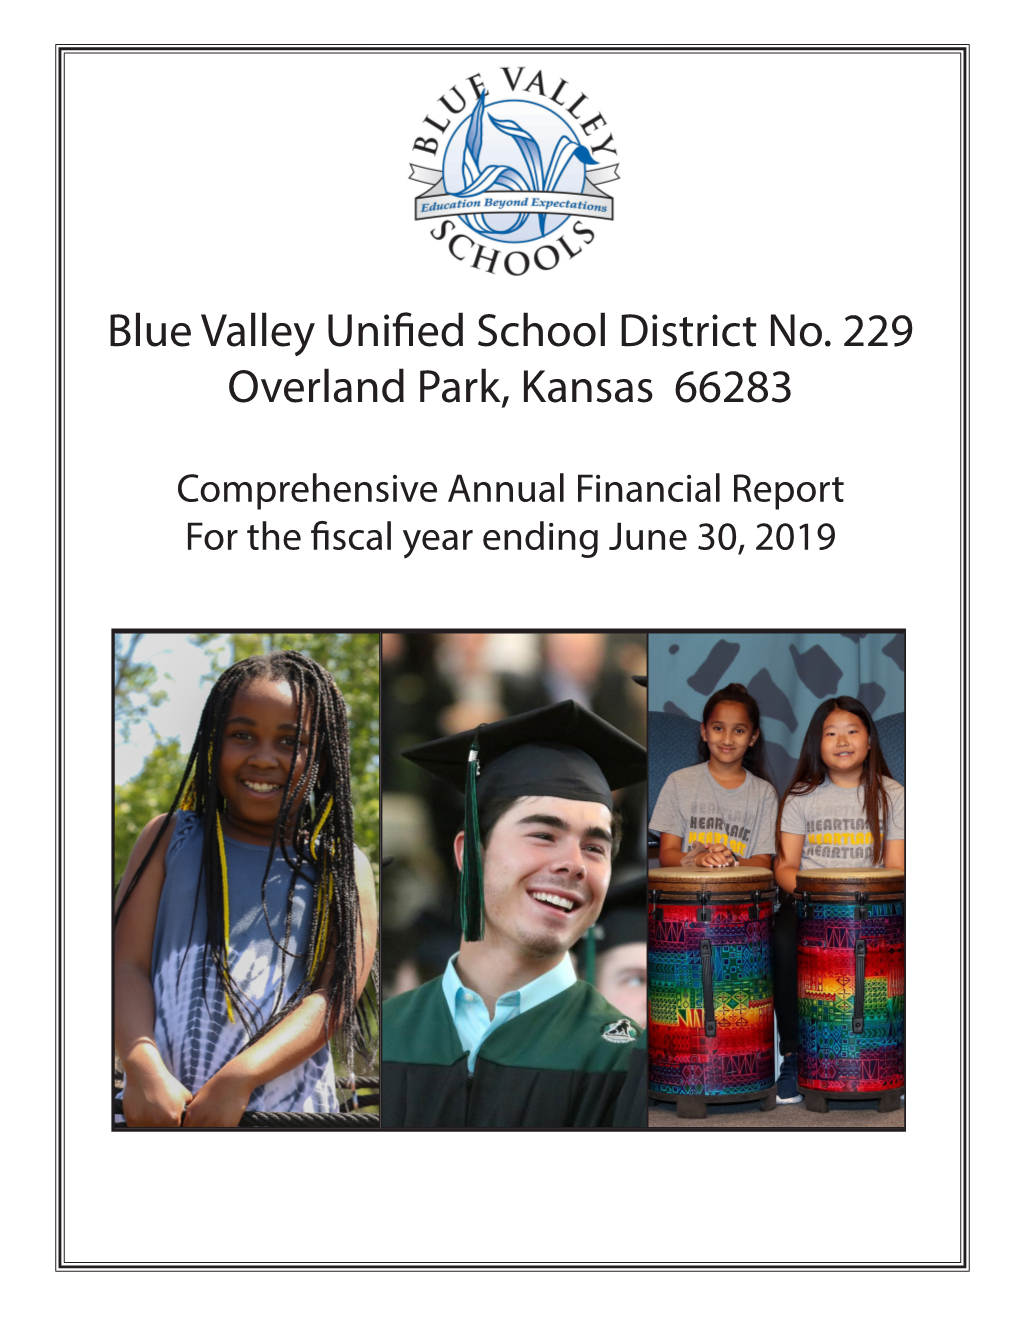 Comprehensive Annual Financial Report for the Fiscal Year Ending June 30, 2019   